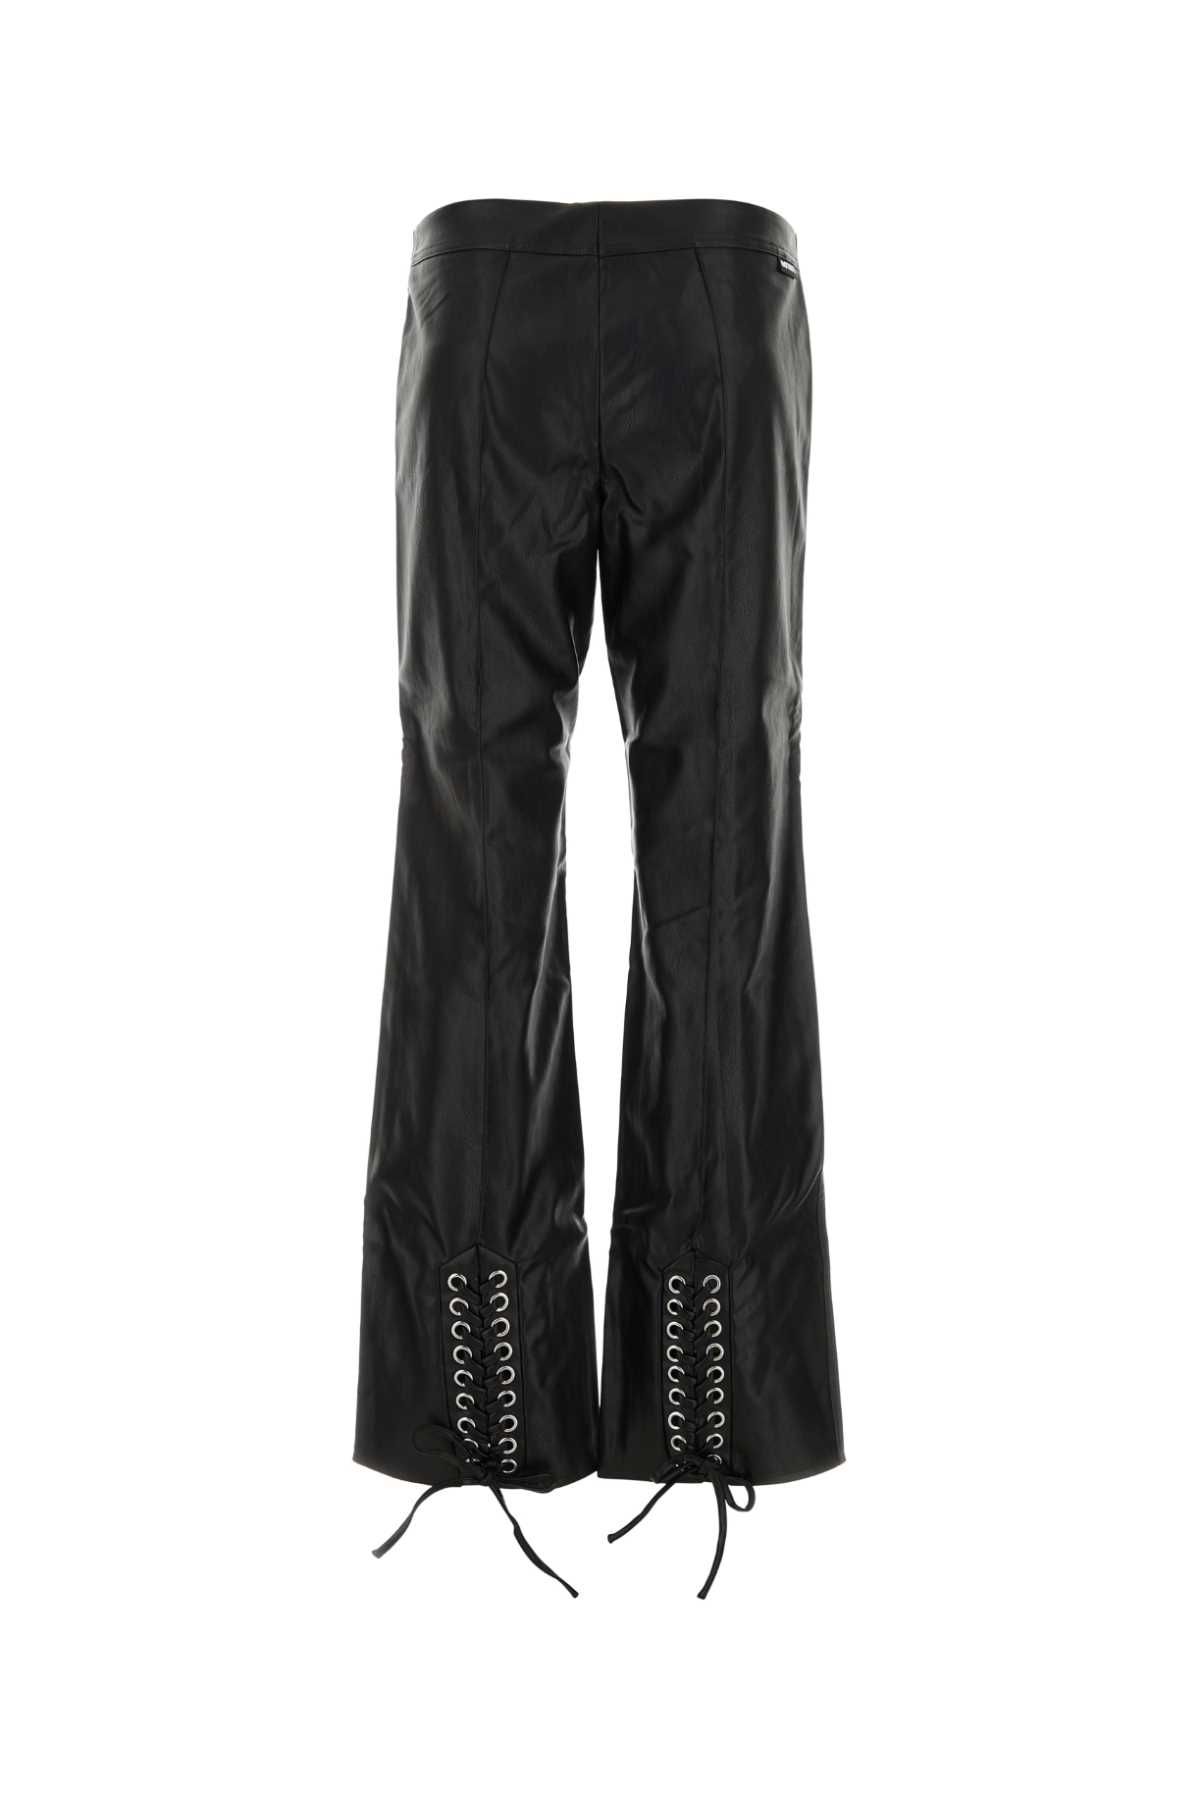 Rotate Birger Christensen Black Synthetic Leather Trouser